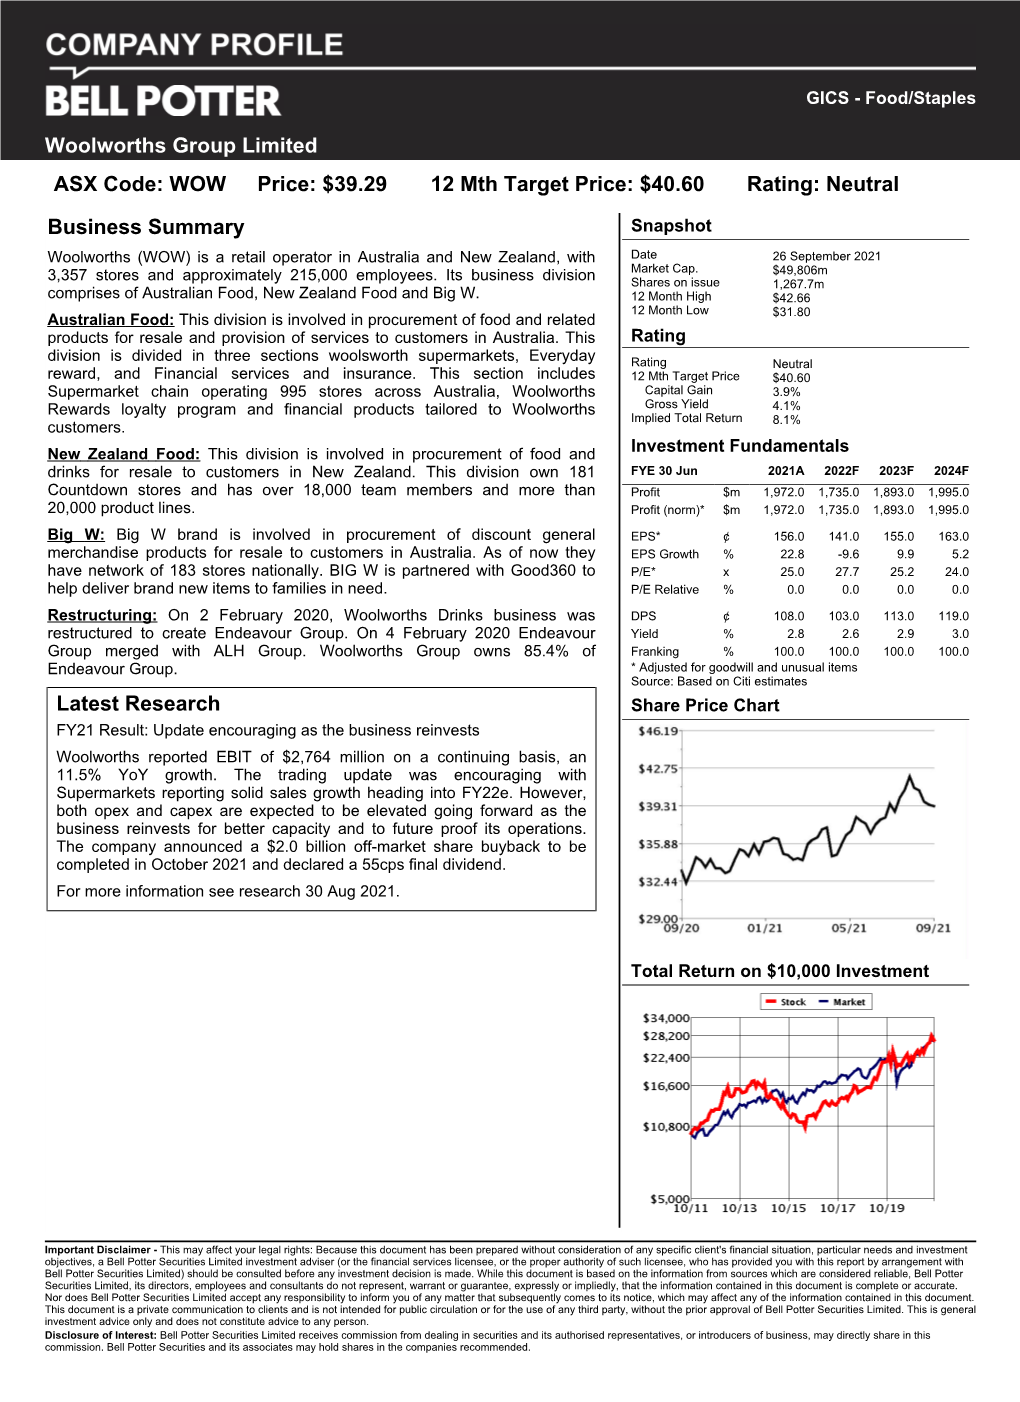 Woolworths Group Limited ASX Code: WOW Price: $39.29 12 Mth Target Price: $40.60 Rating: Neutral